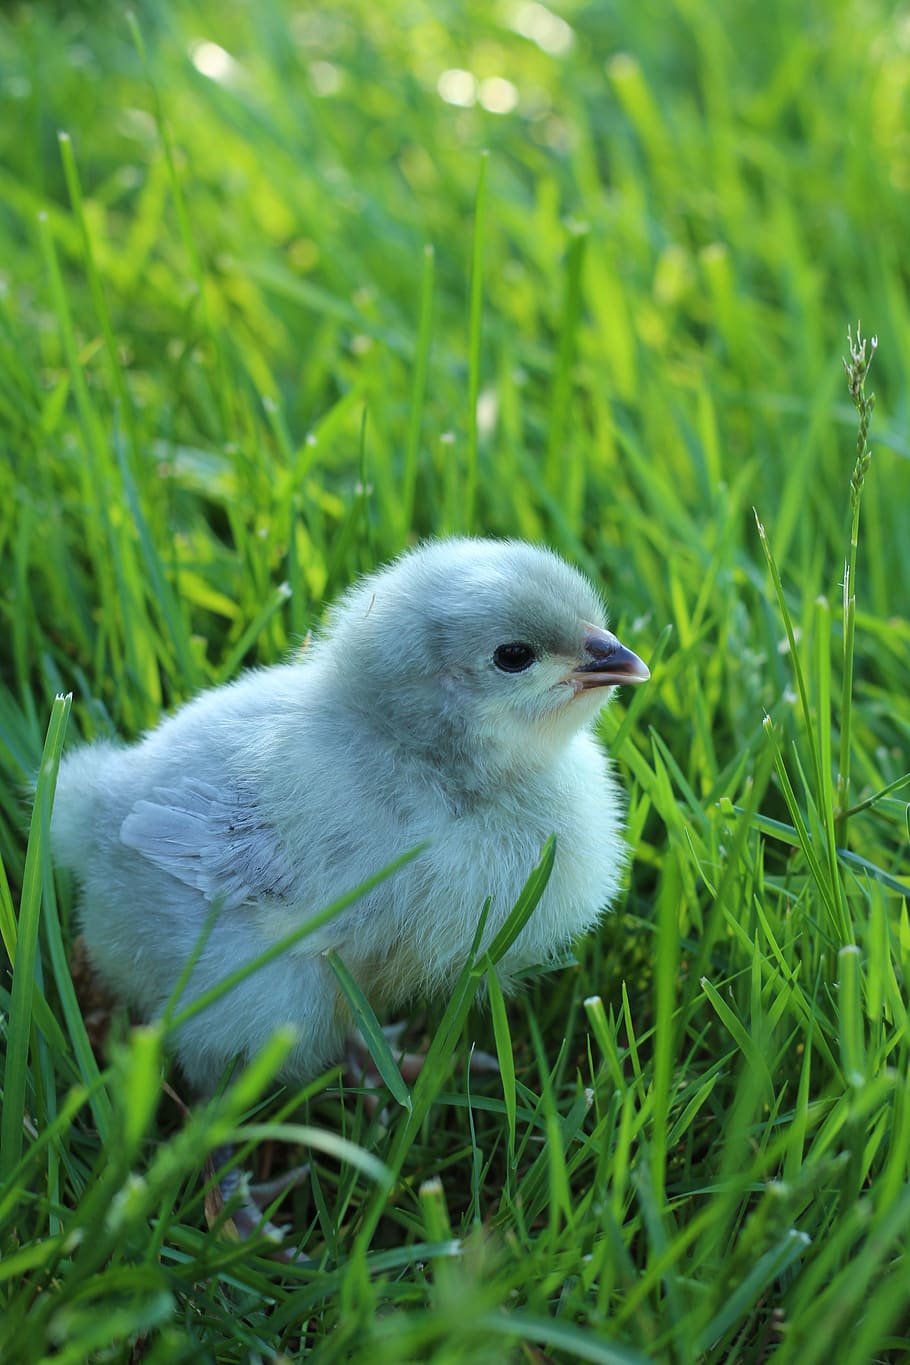 chick, bird, chicks, animal, young, bill, poultry, fluff, cute, feather